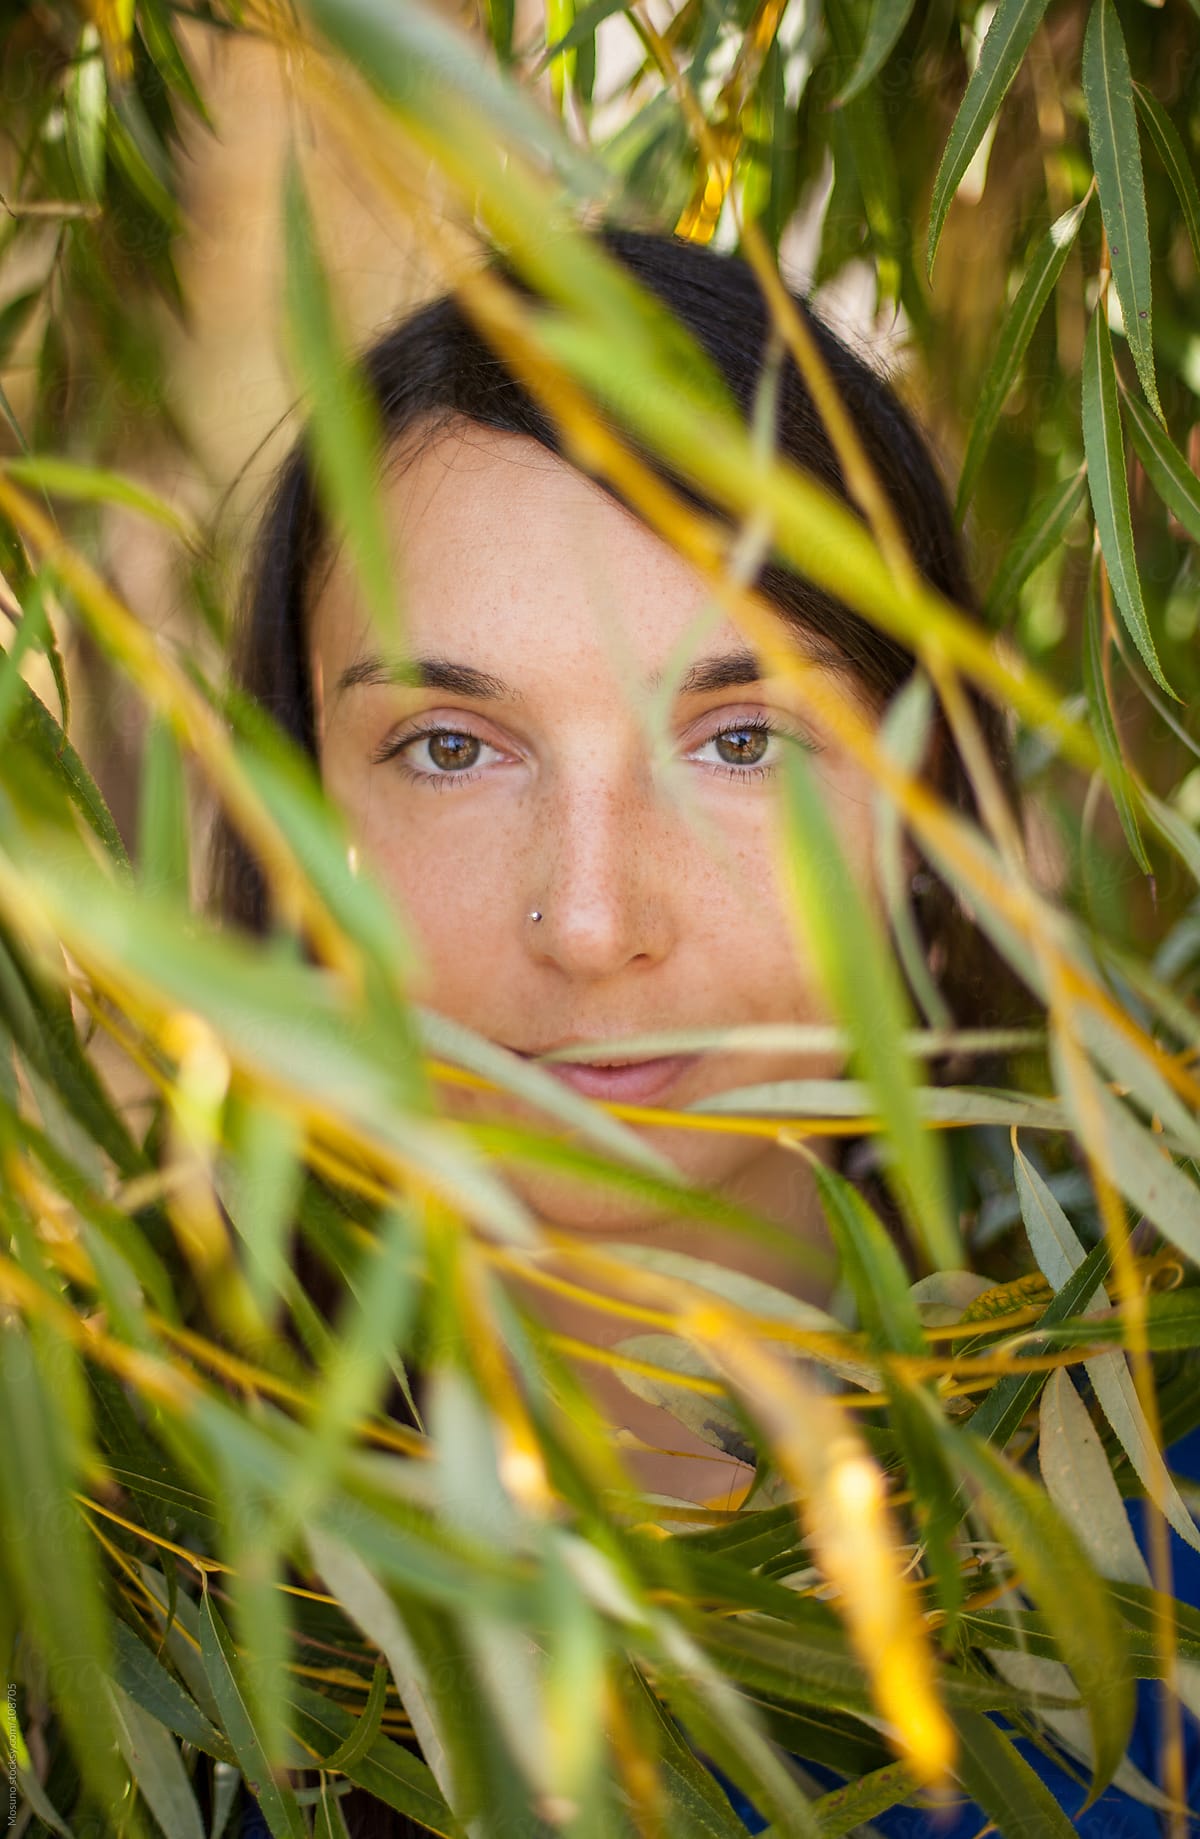 Portrait Of A Woman In A Willow Forest By Stocksy Contributor Mosuno Stocksy